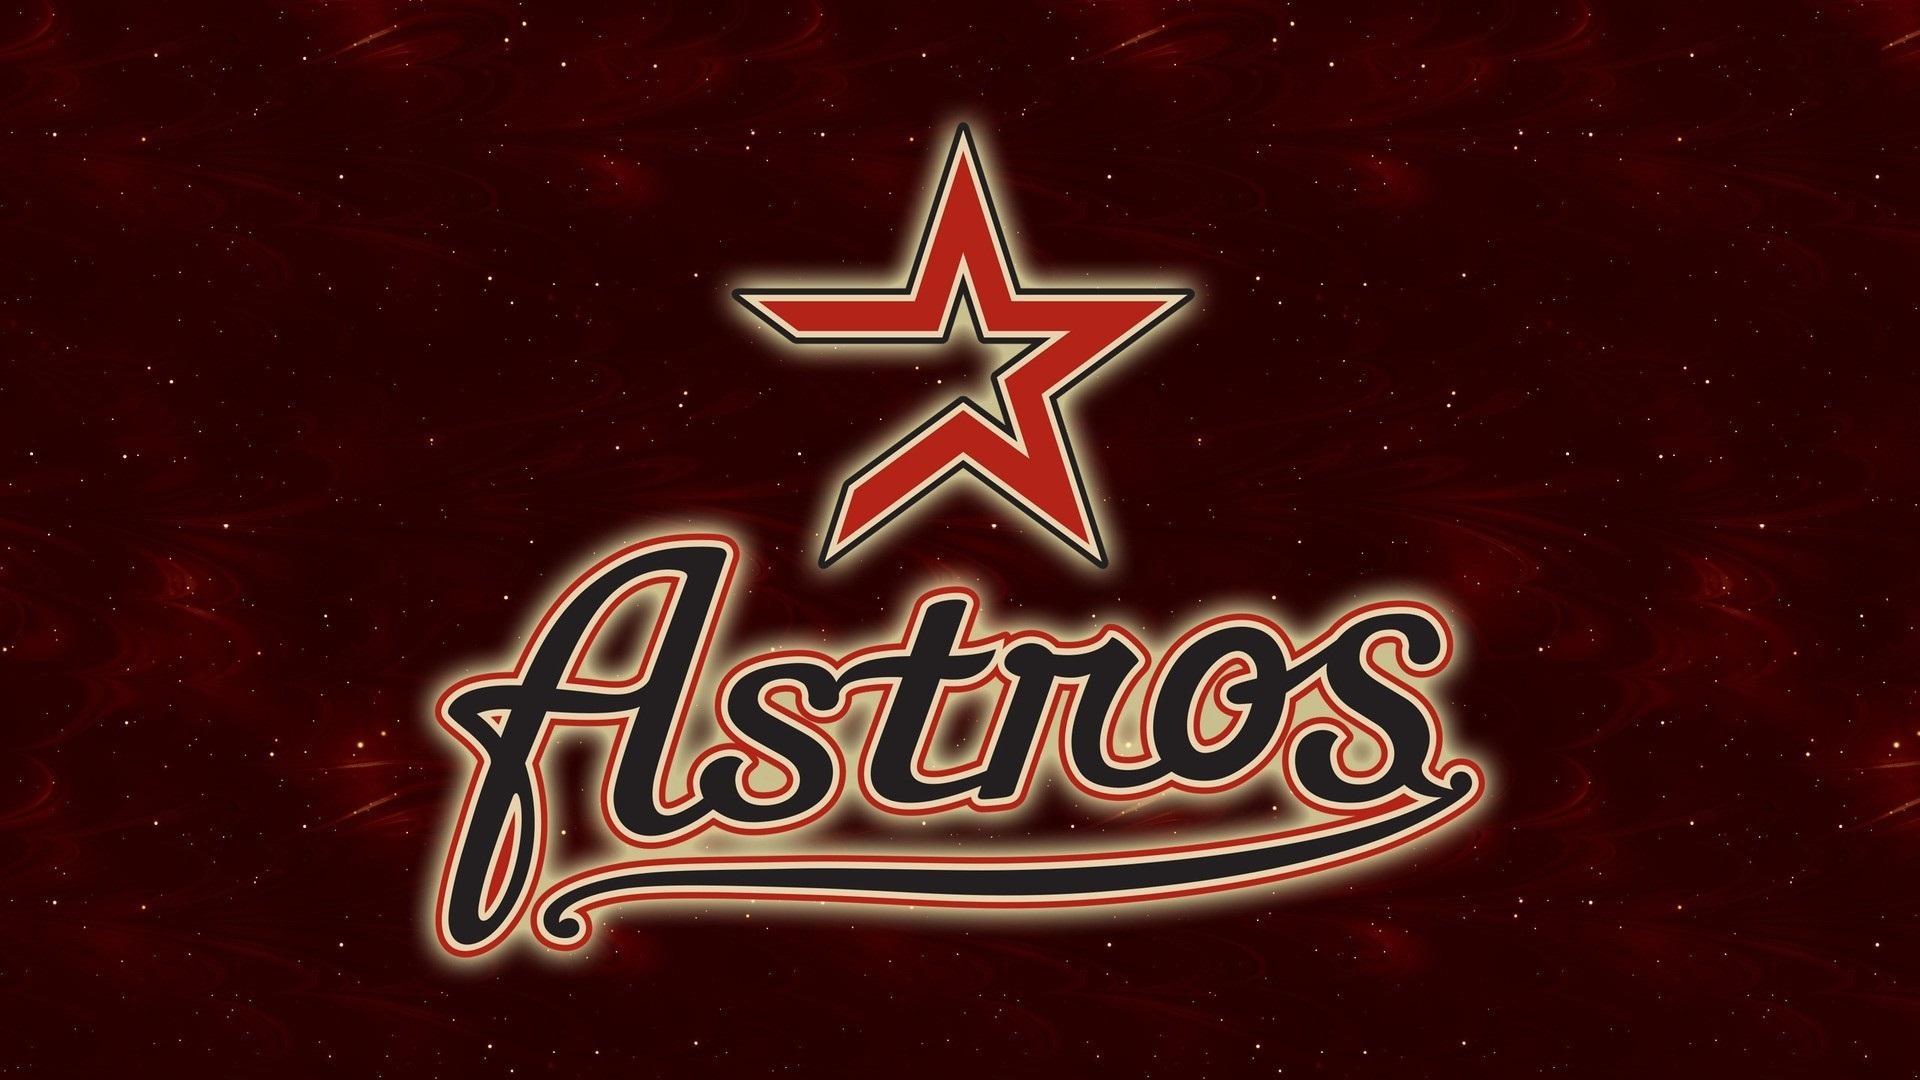 Houston Astros Logo Wallpaper with high-resolution 1920x1080 pixel. You can use this wallpaper for Mac Desktop Wallpaper, Laptop Screensavers, Android Wallpapers, Tablet or iPhone Home Screen and another mobile phone device